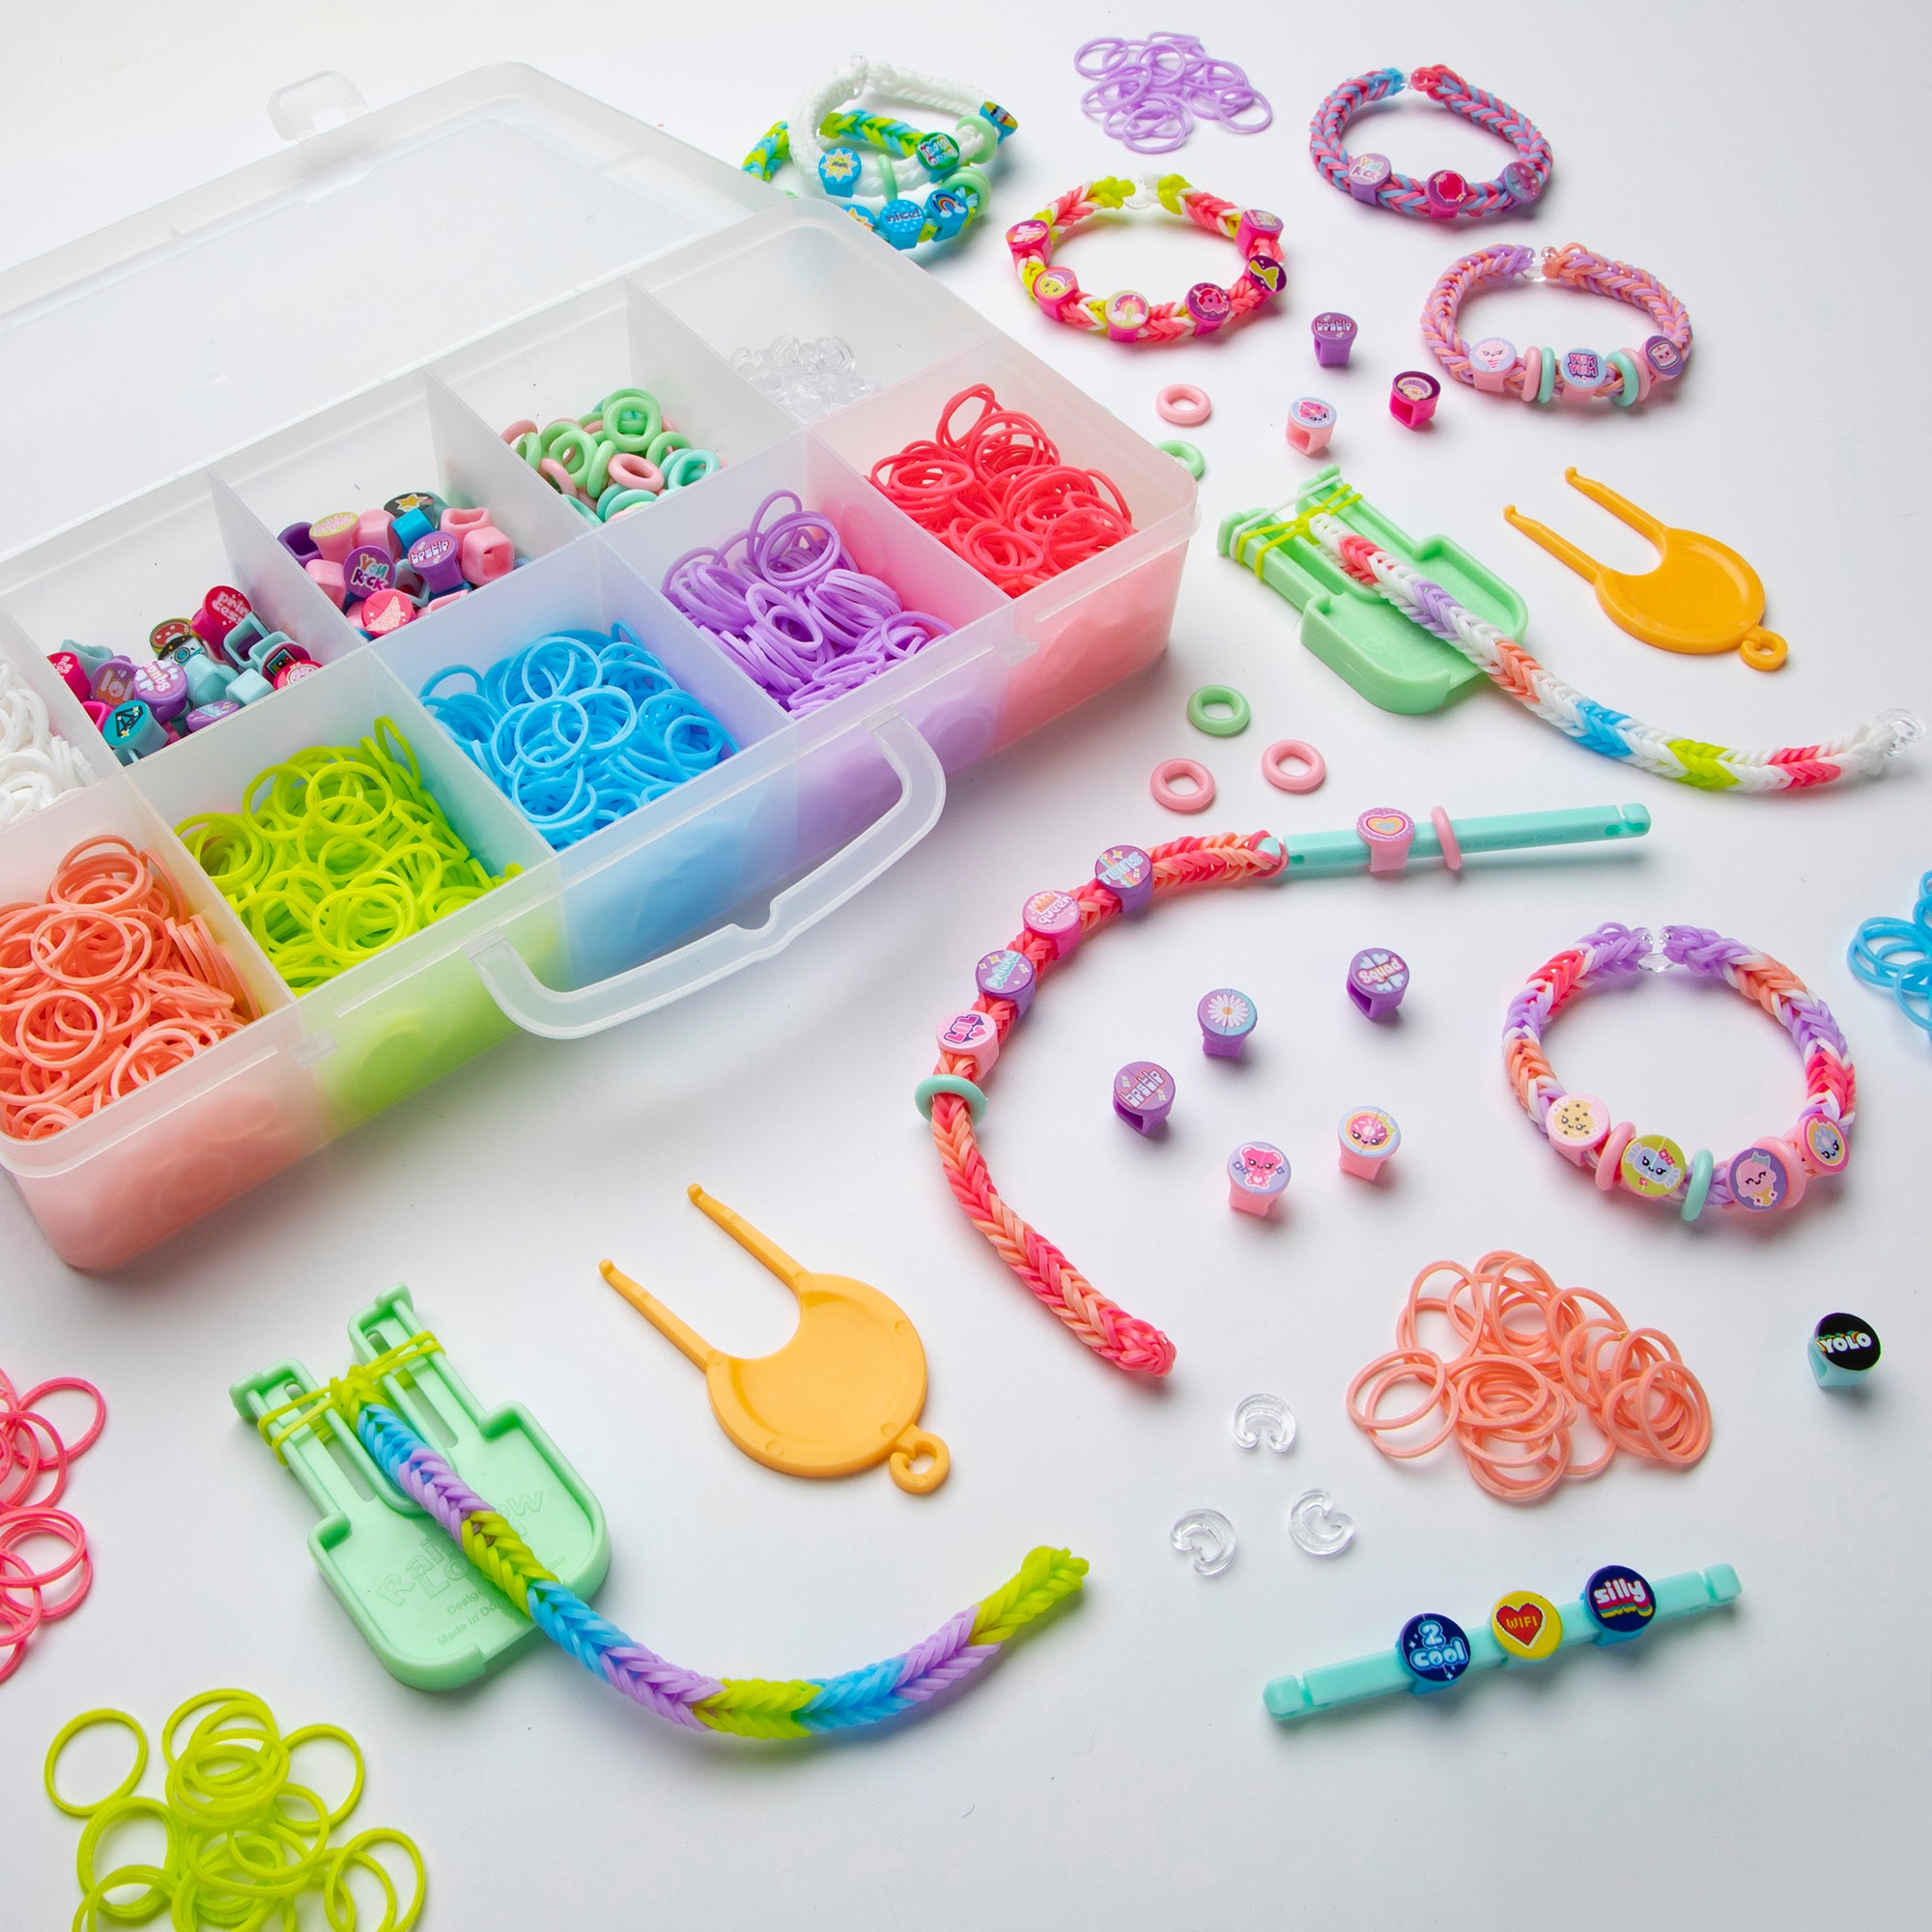 Giving Smiles With Alphabet Beads Loom Band Bracelets Craft! - Fun Learning  Life